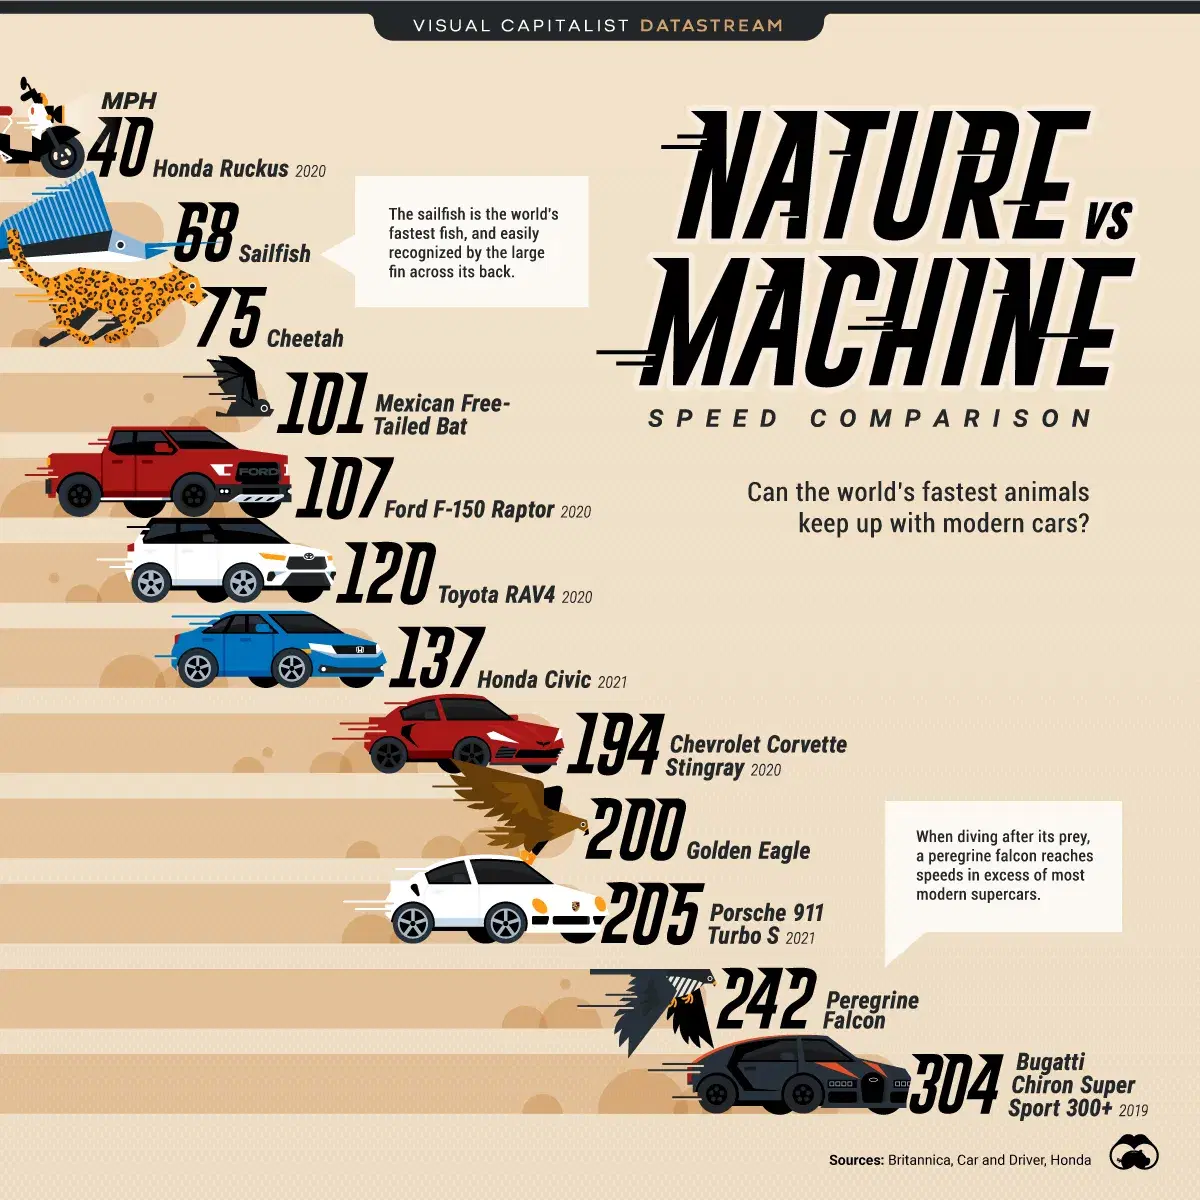 What’s Faster, Nature or Machine?